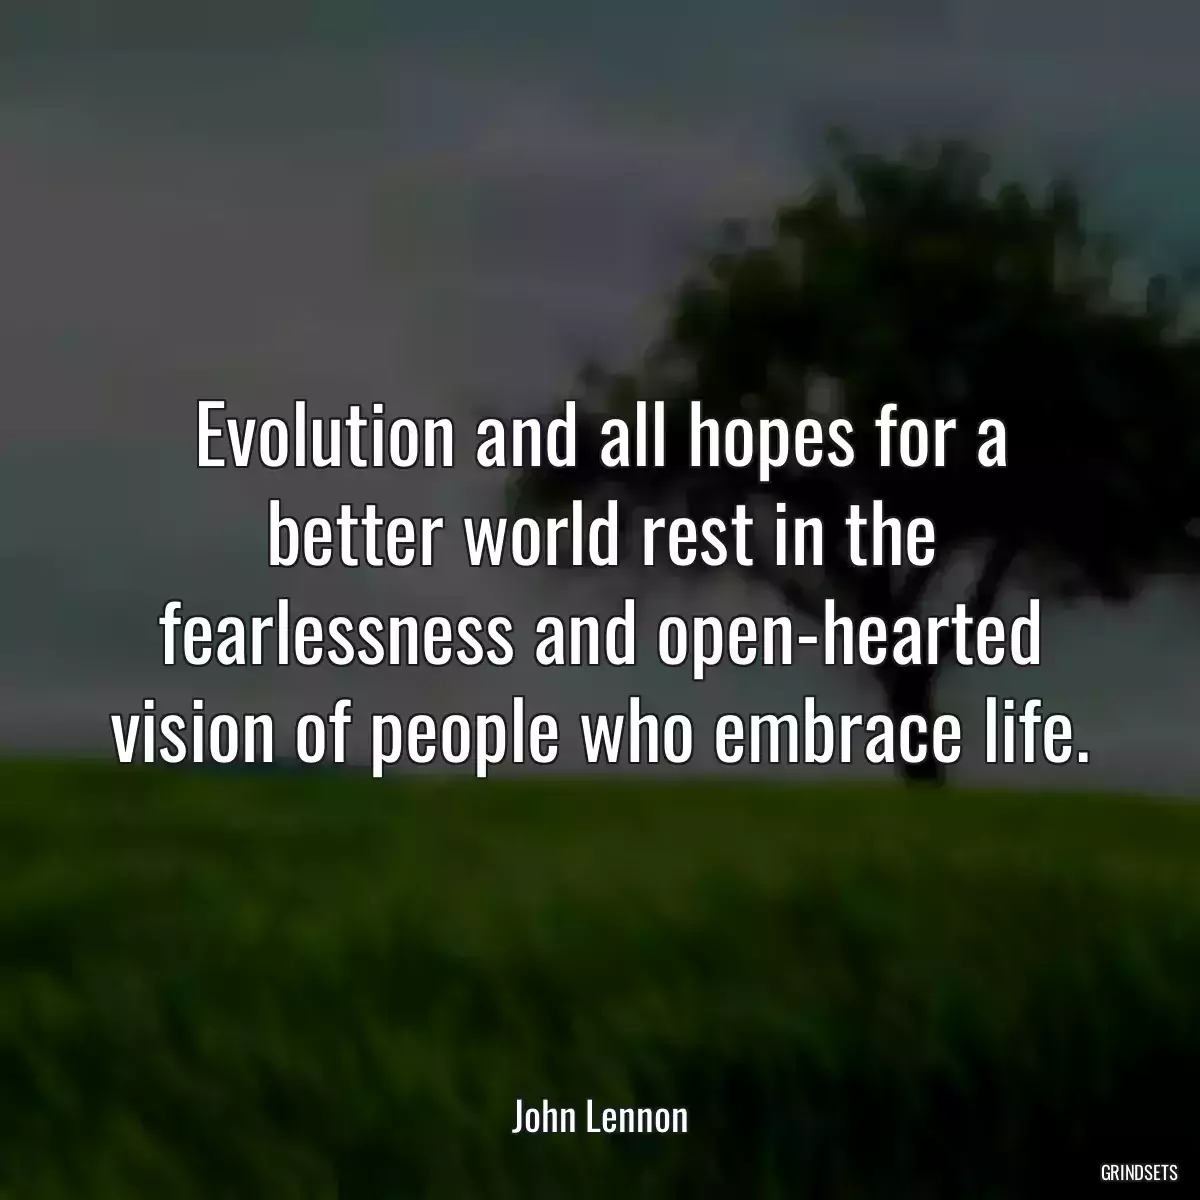 Evolution and all hopes for a better world rest in the fearlessness and open-hearted vision of people who embrace life.